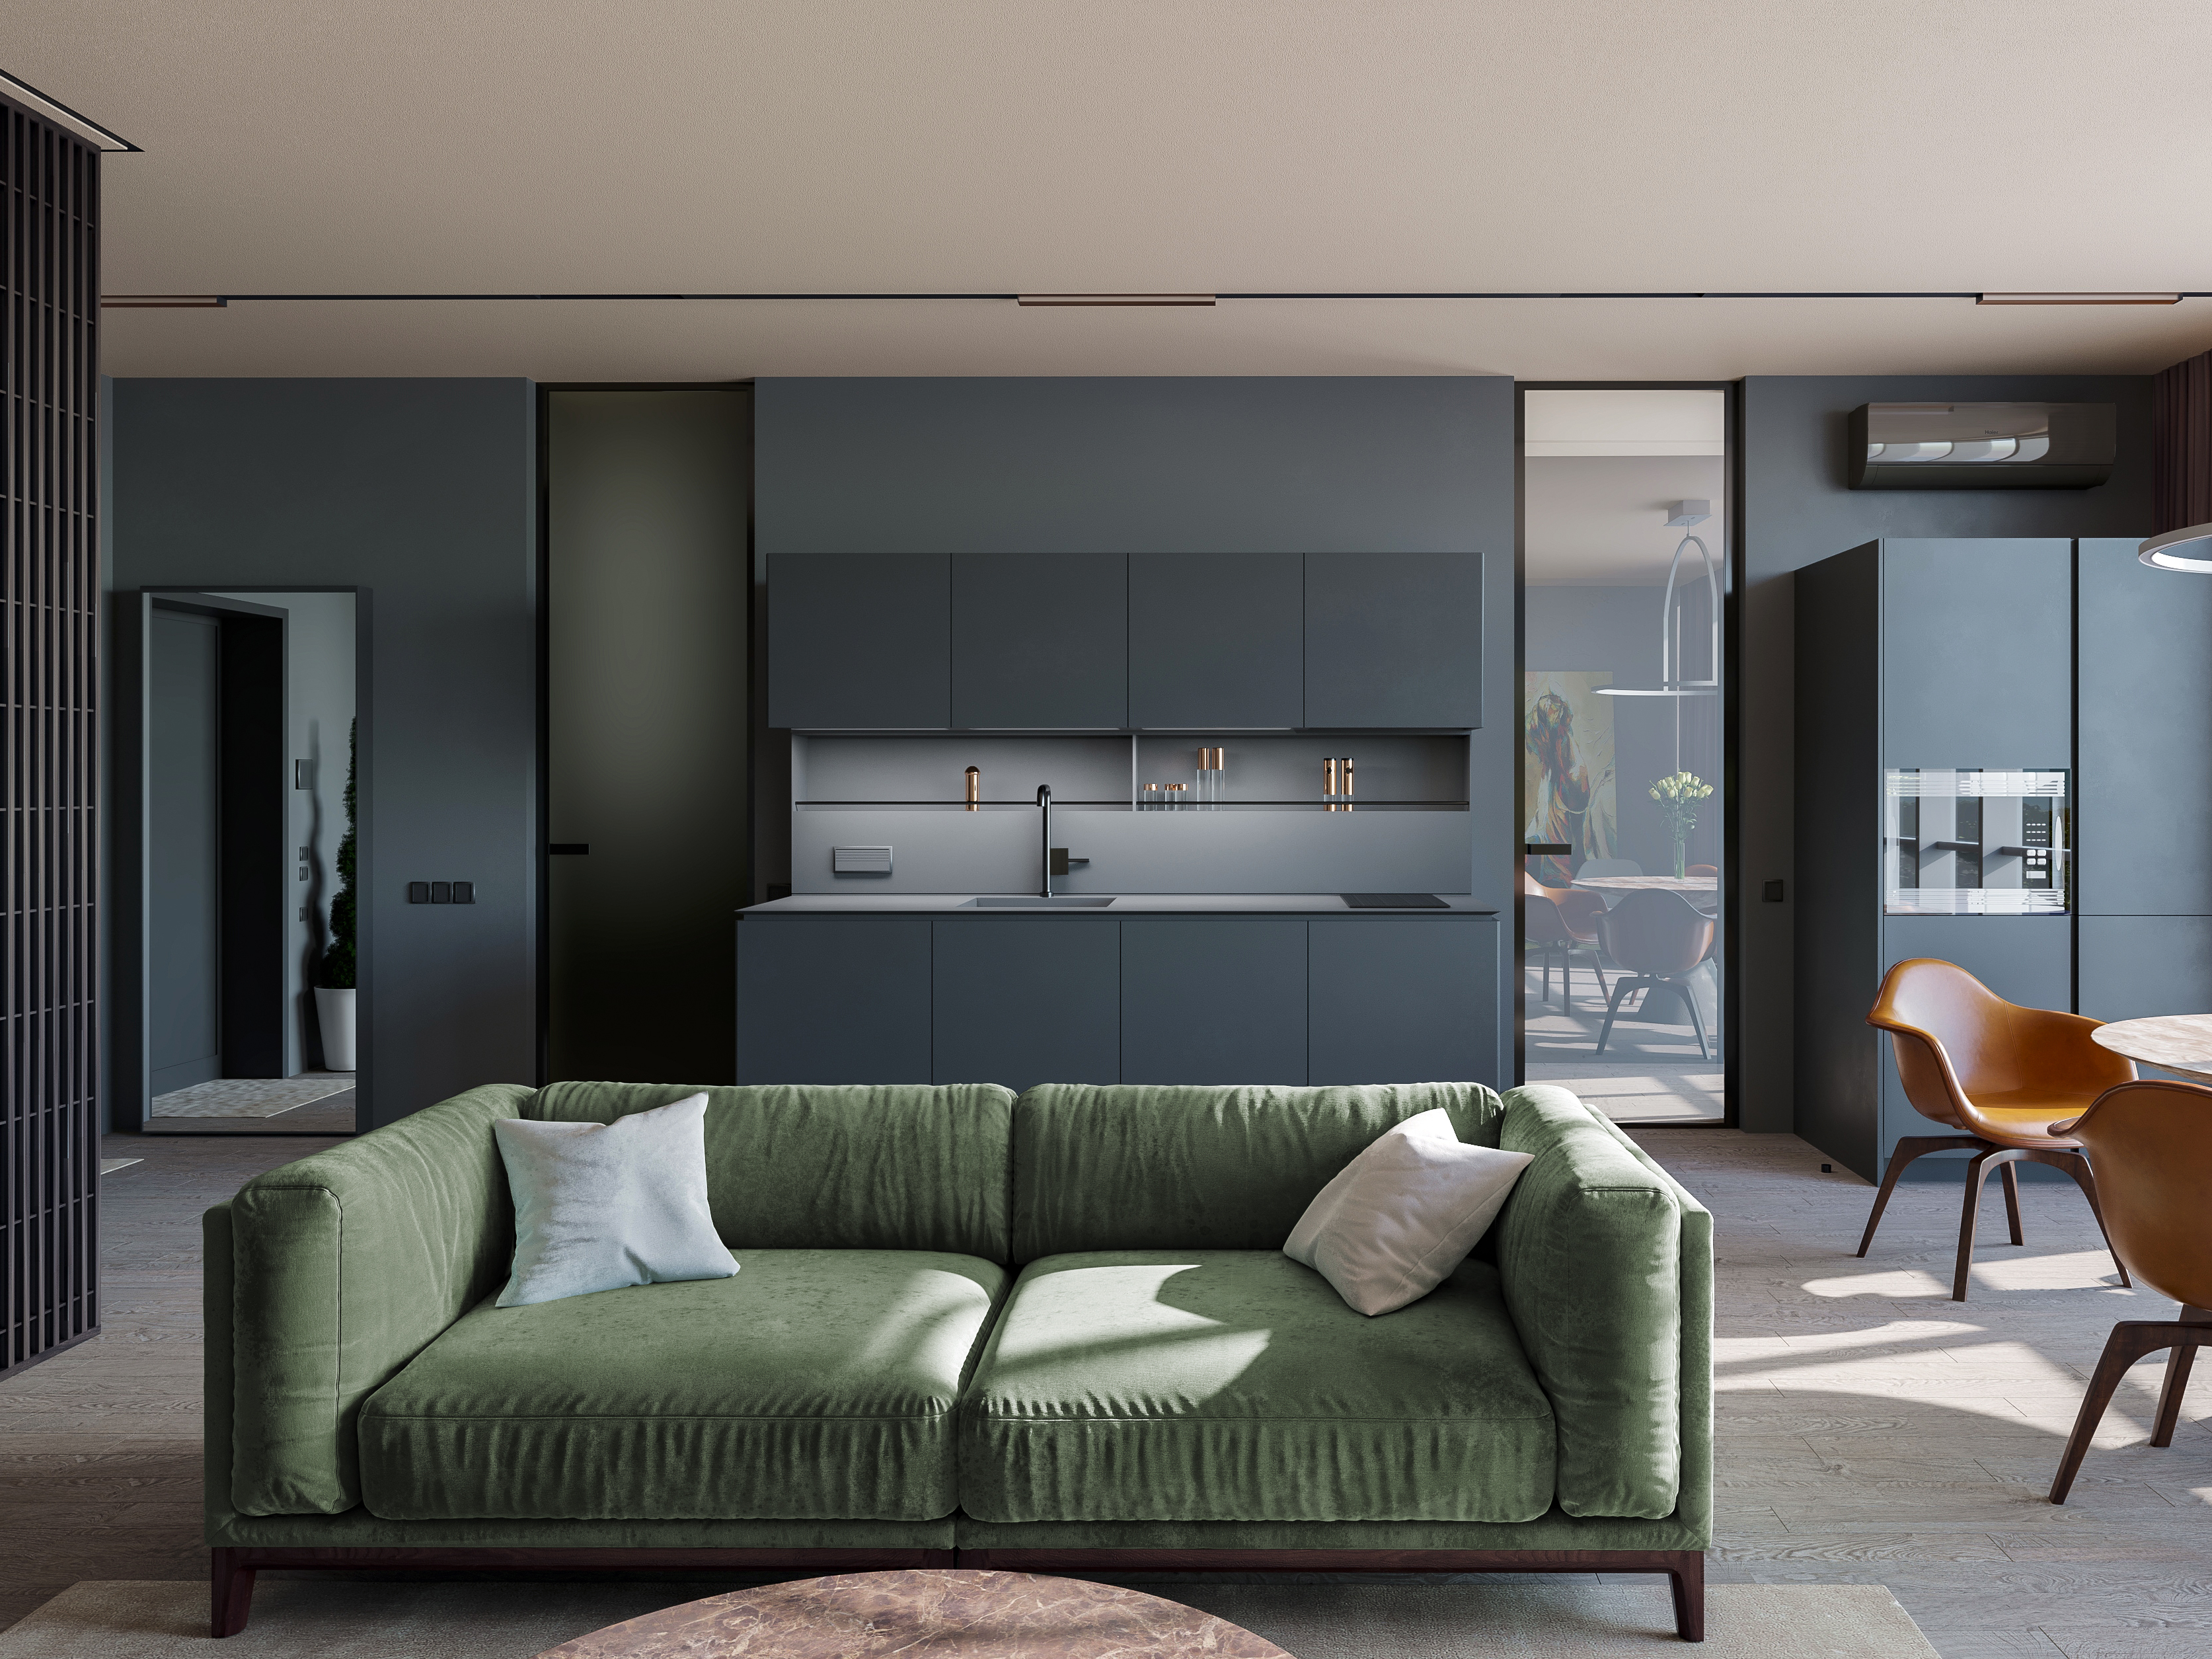 Interior Visualization Of A Small Flat By Irender On Dribbble